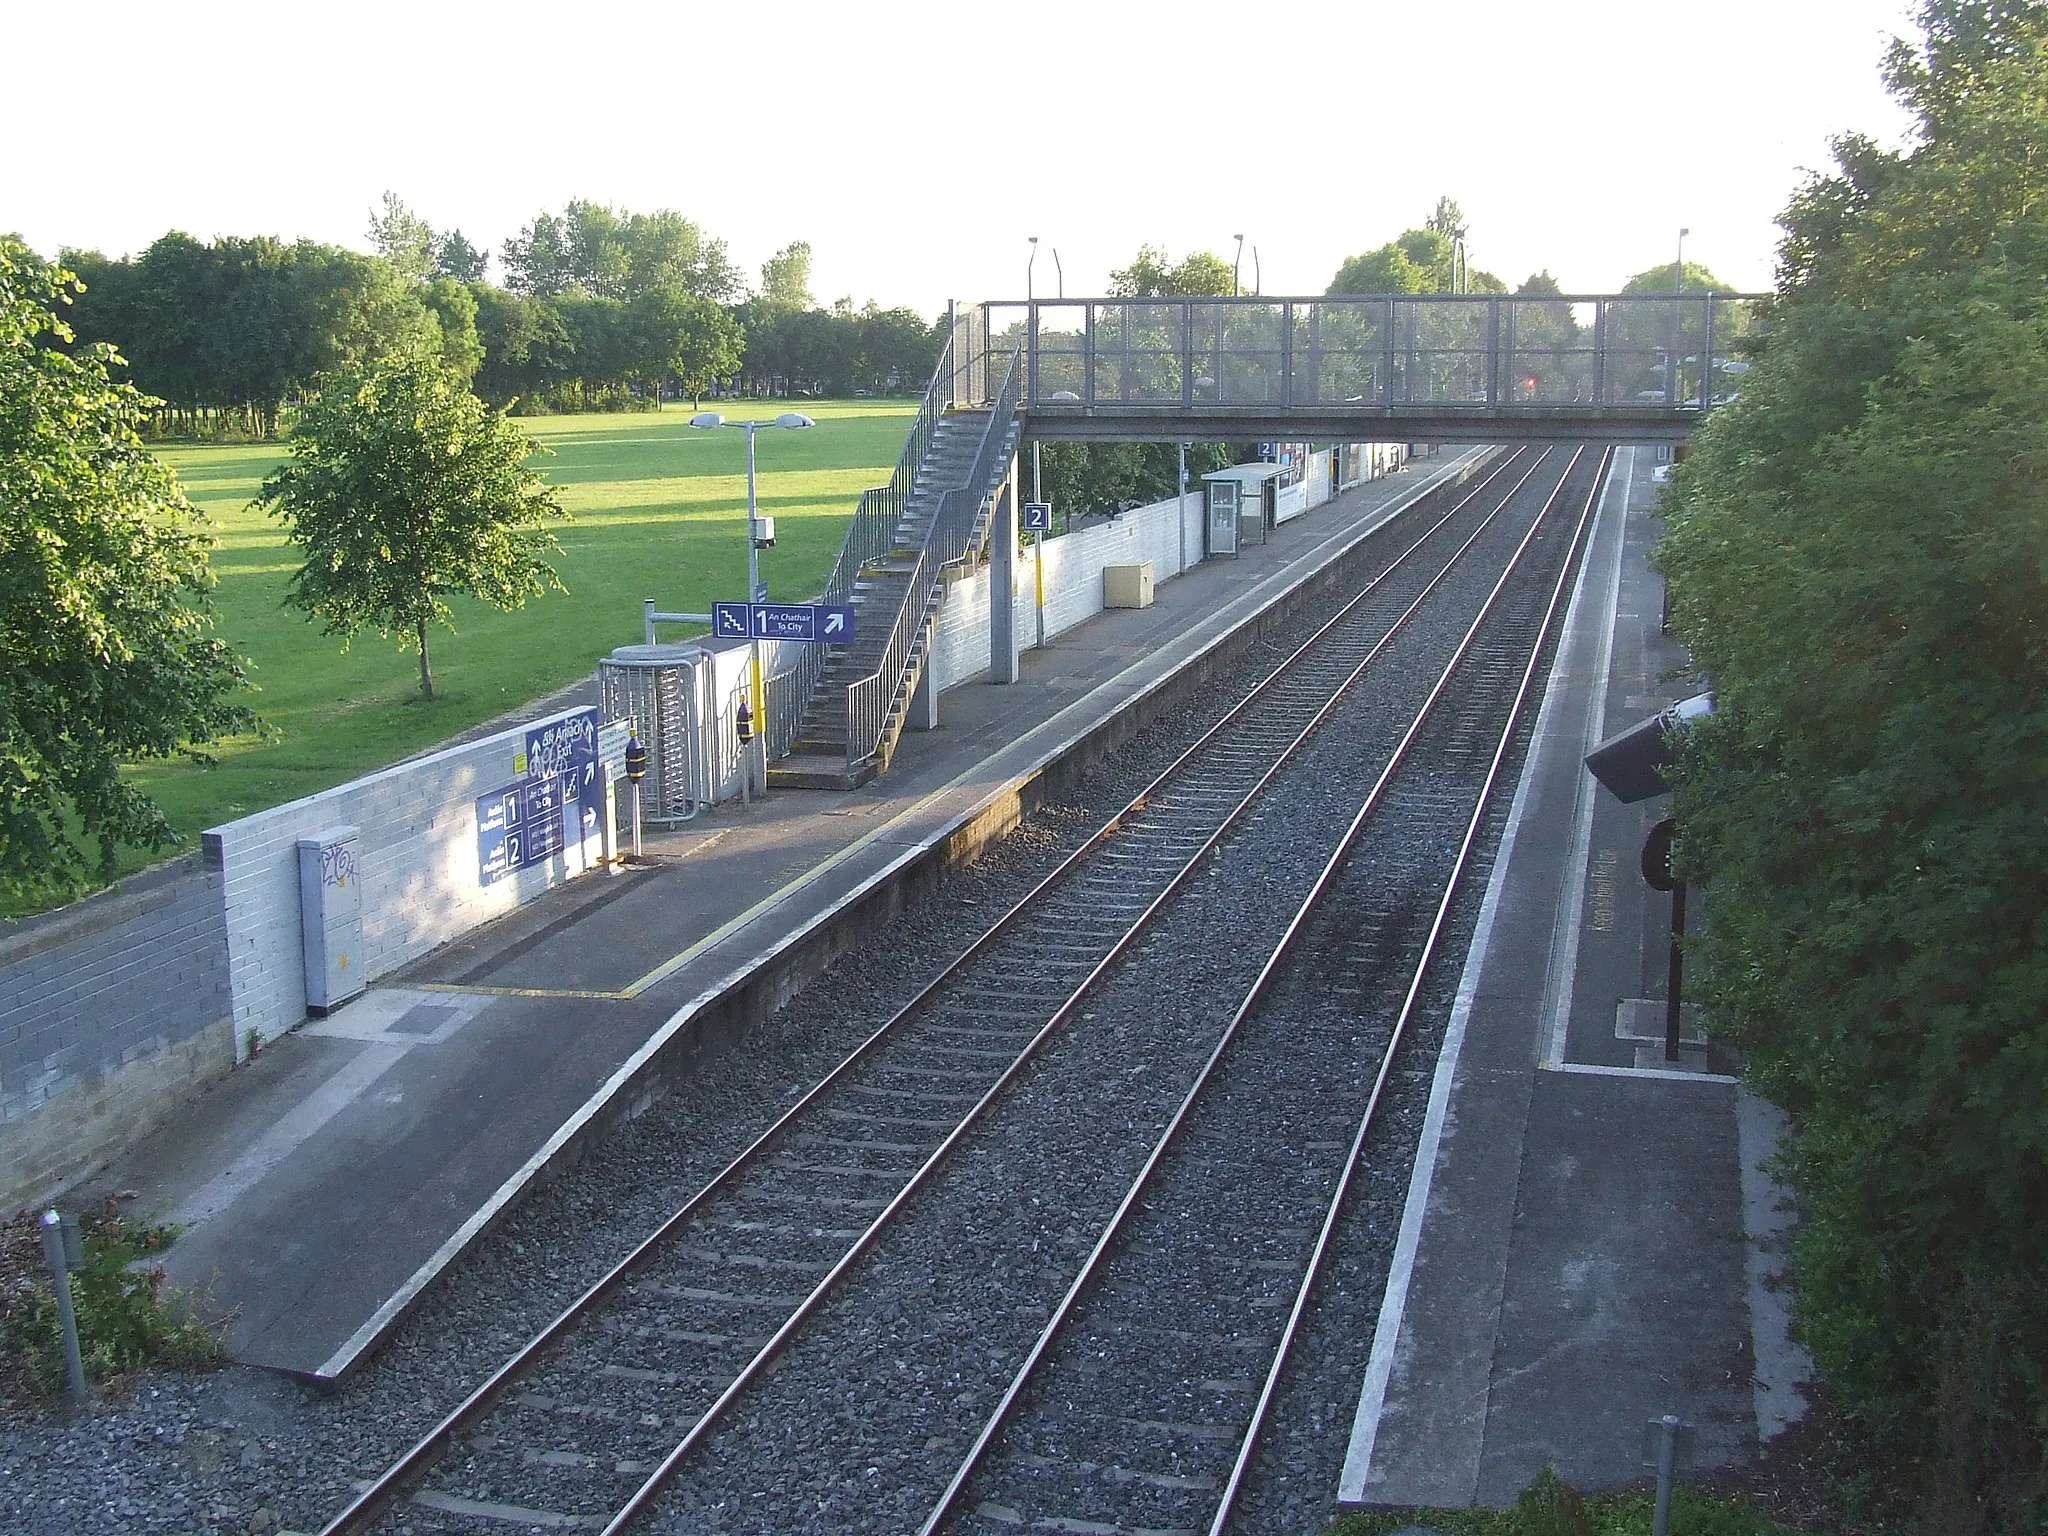 Photo showing: Looking west along the railway from the top of Granard Bridge near the 12th lock of the Royal Canal. Midsummer's Day, an hour before sunset, 2014.